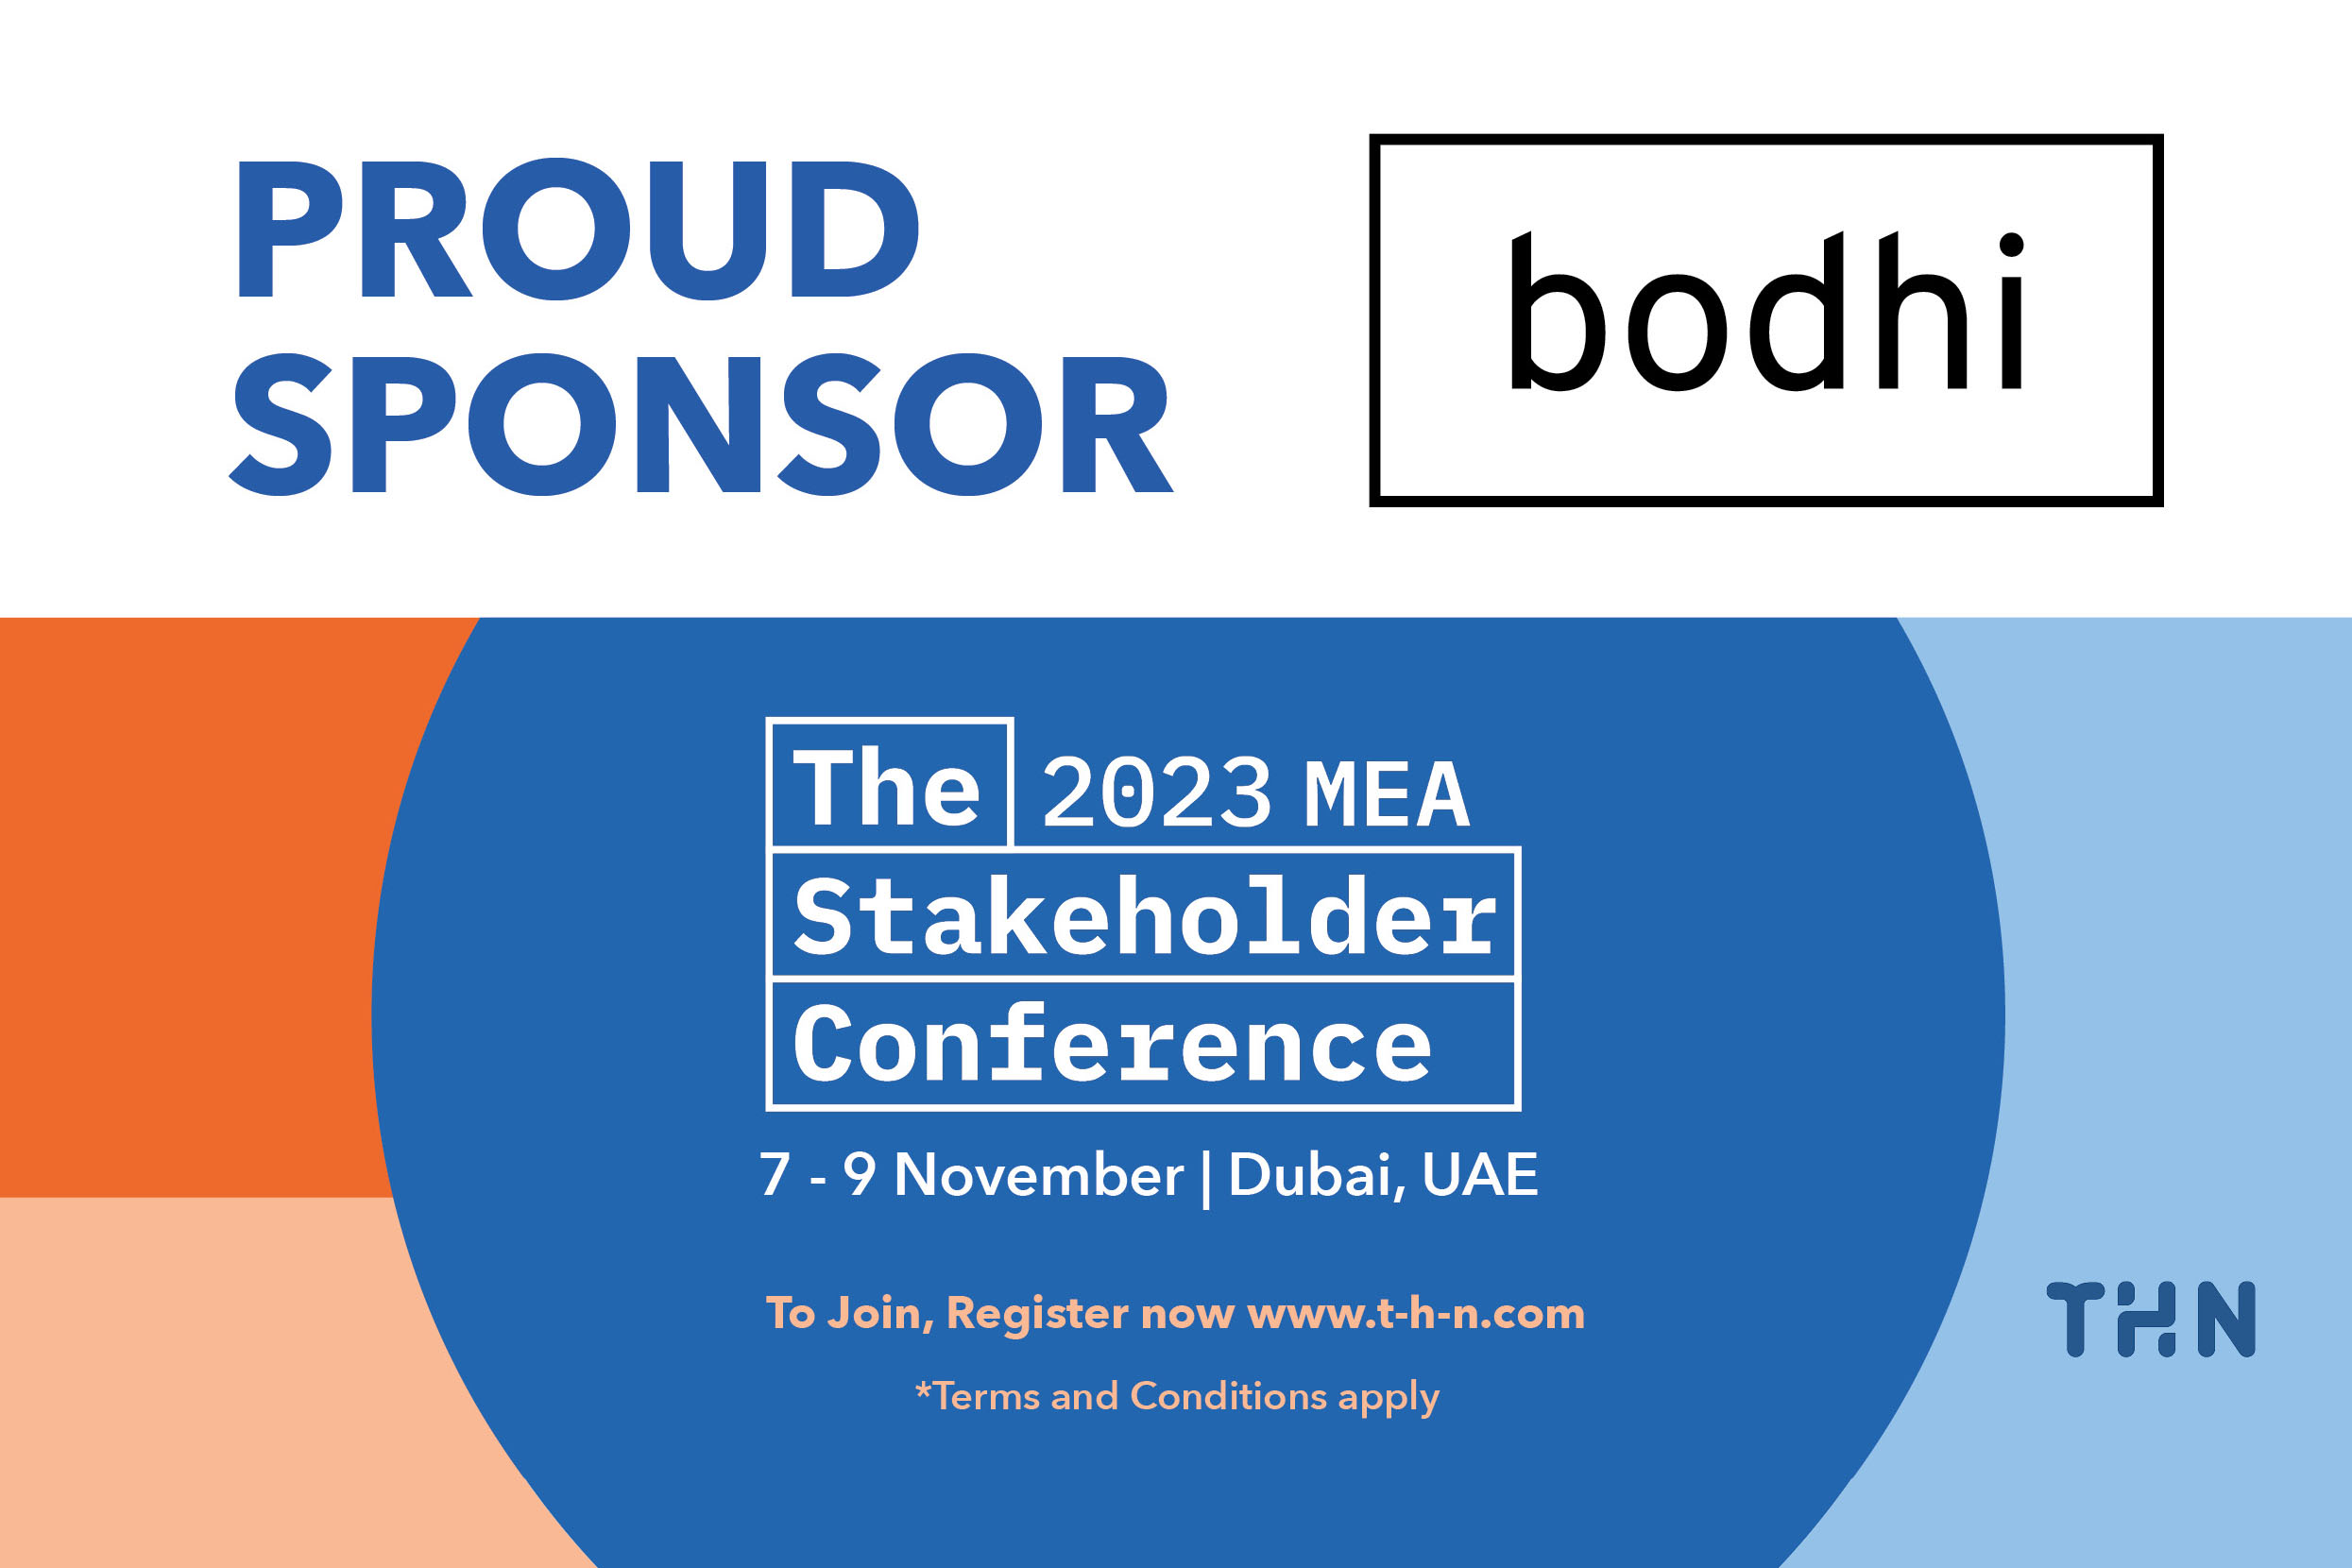 Bodhi is a proud sponsor of the Stakeholders Conference, Dubai 2023